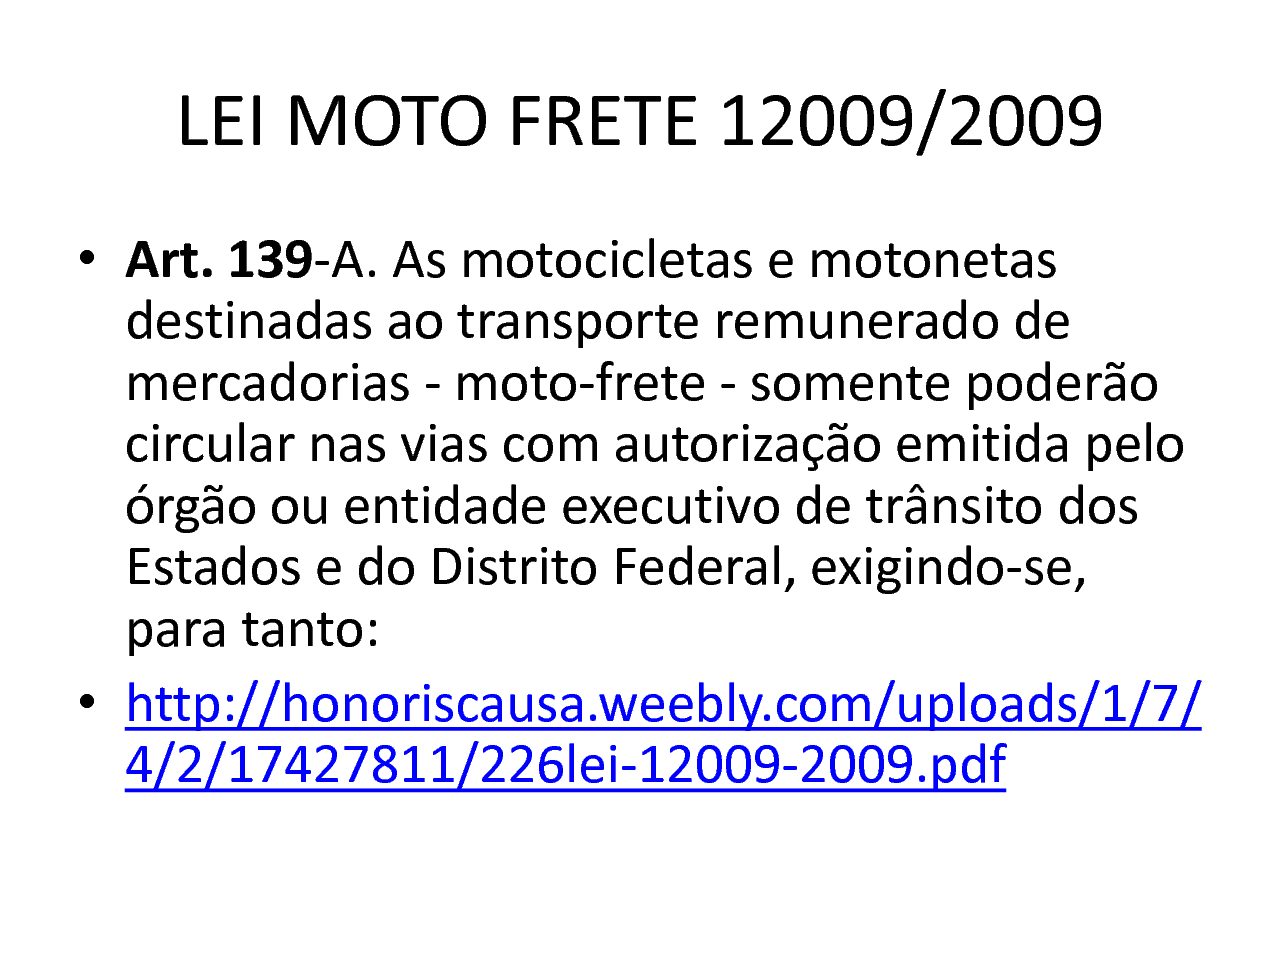 You are currently viewing Lei moto frete